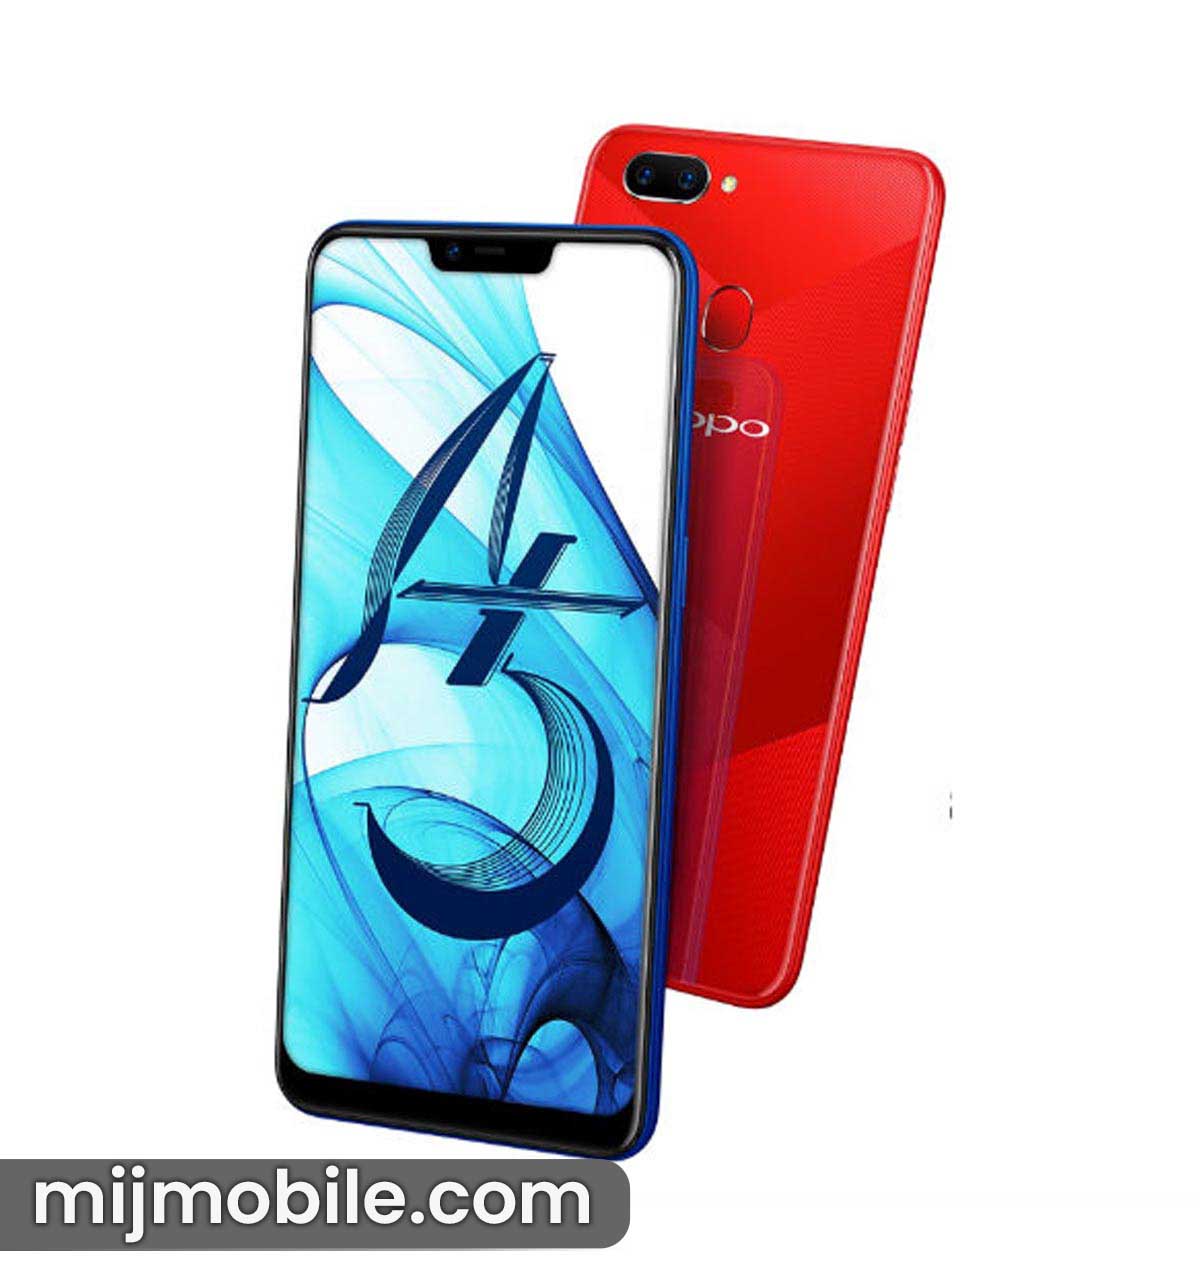 Oppo A5 2018 Price in Pakistan & Specifications Oppo A5 2018 Price in Pakistan is only 29,999.